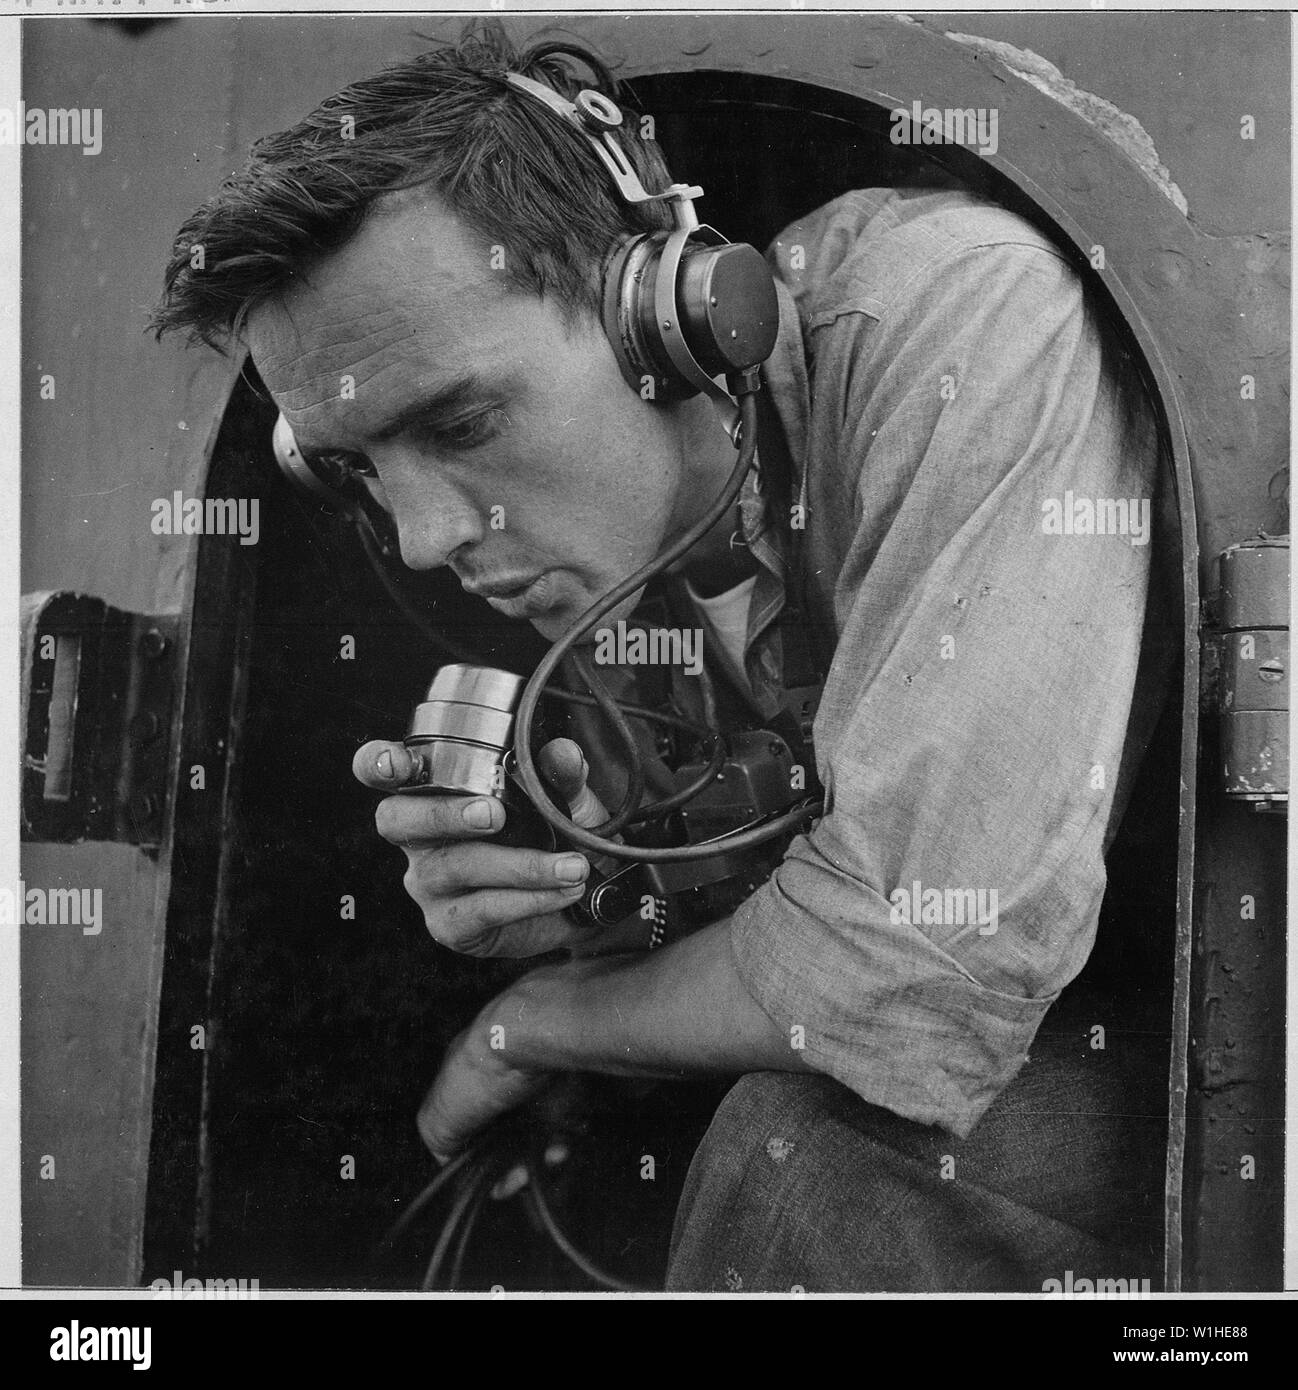 On bridge of U.S. submarine at submarine base New London, Connecticut Relaying commands to quick firing 20mm gun crew.; General notes:  Use War and Conflict Number 939 when ordering a reproduction or requesting information about this image. Stock Photo